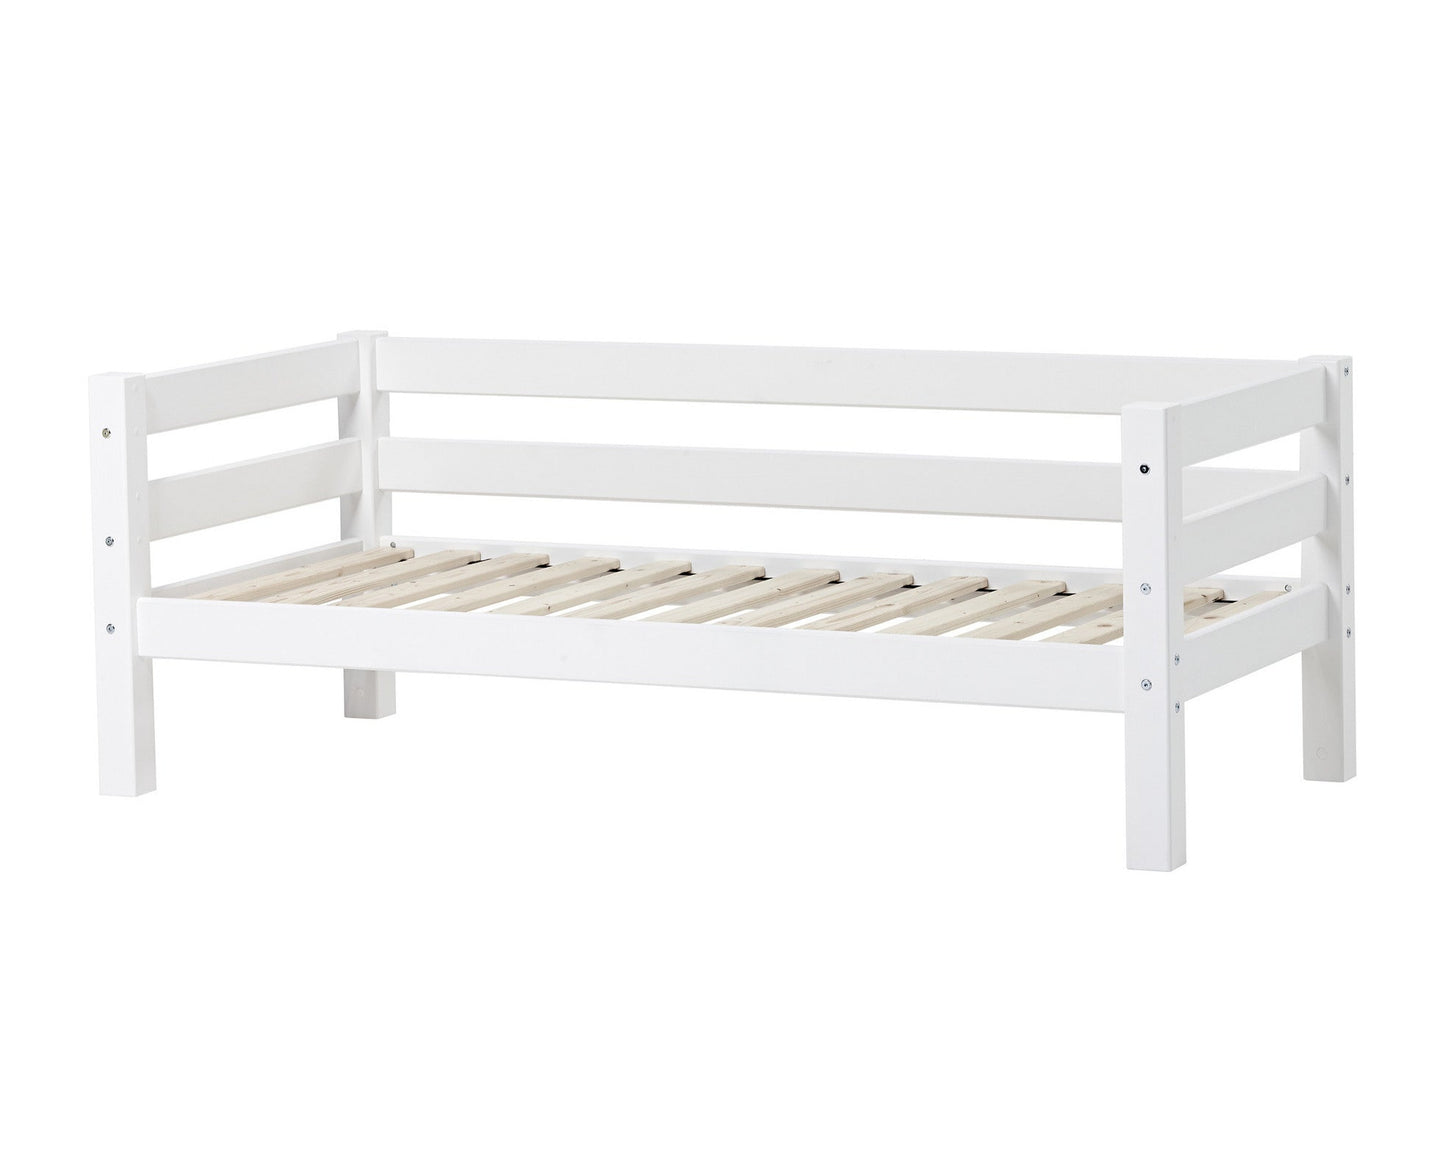 ECO Luxury - Junior bed with backrest - 70x160cm - white